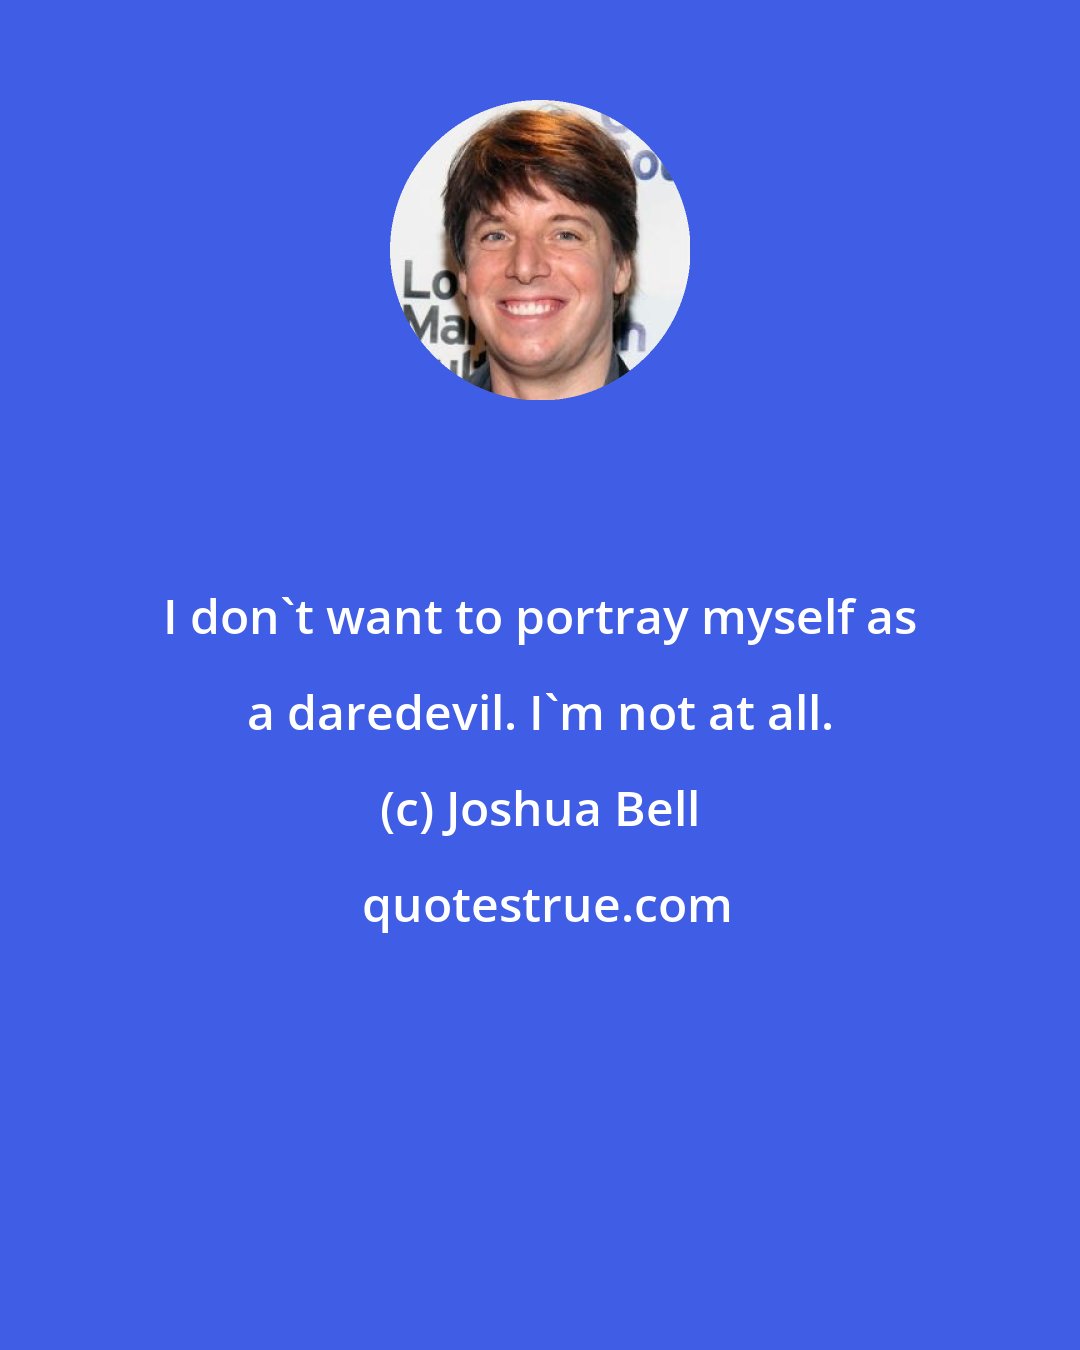 Joshua Bell: I don't want to portray myself as a daredevil. I'm not at all.